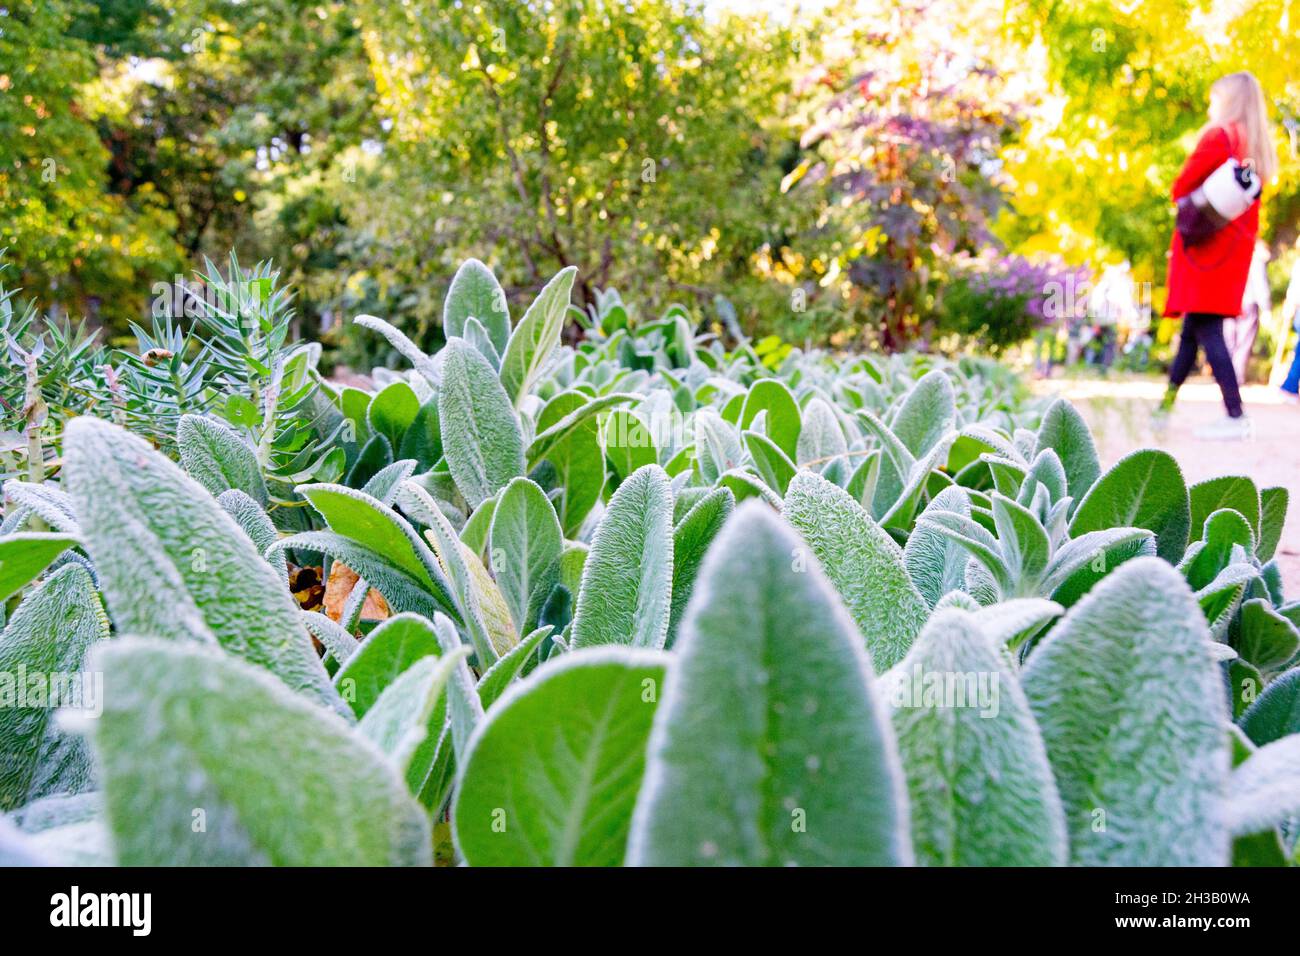 Green plants with white hairs giving a sensation of cold, in the Real Jardín Botánico de Madrid, in Spain. Europe. Horizontal photography. Stock Photo